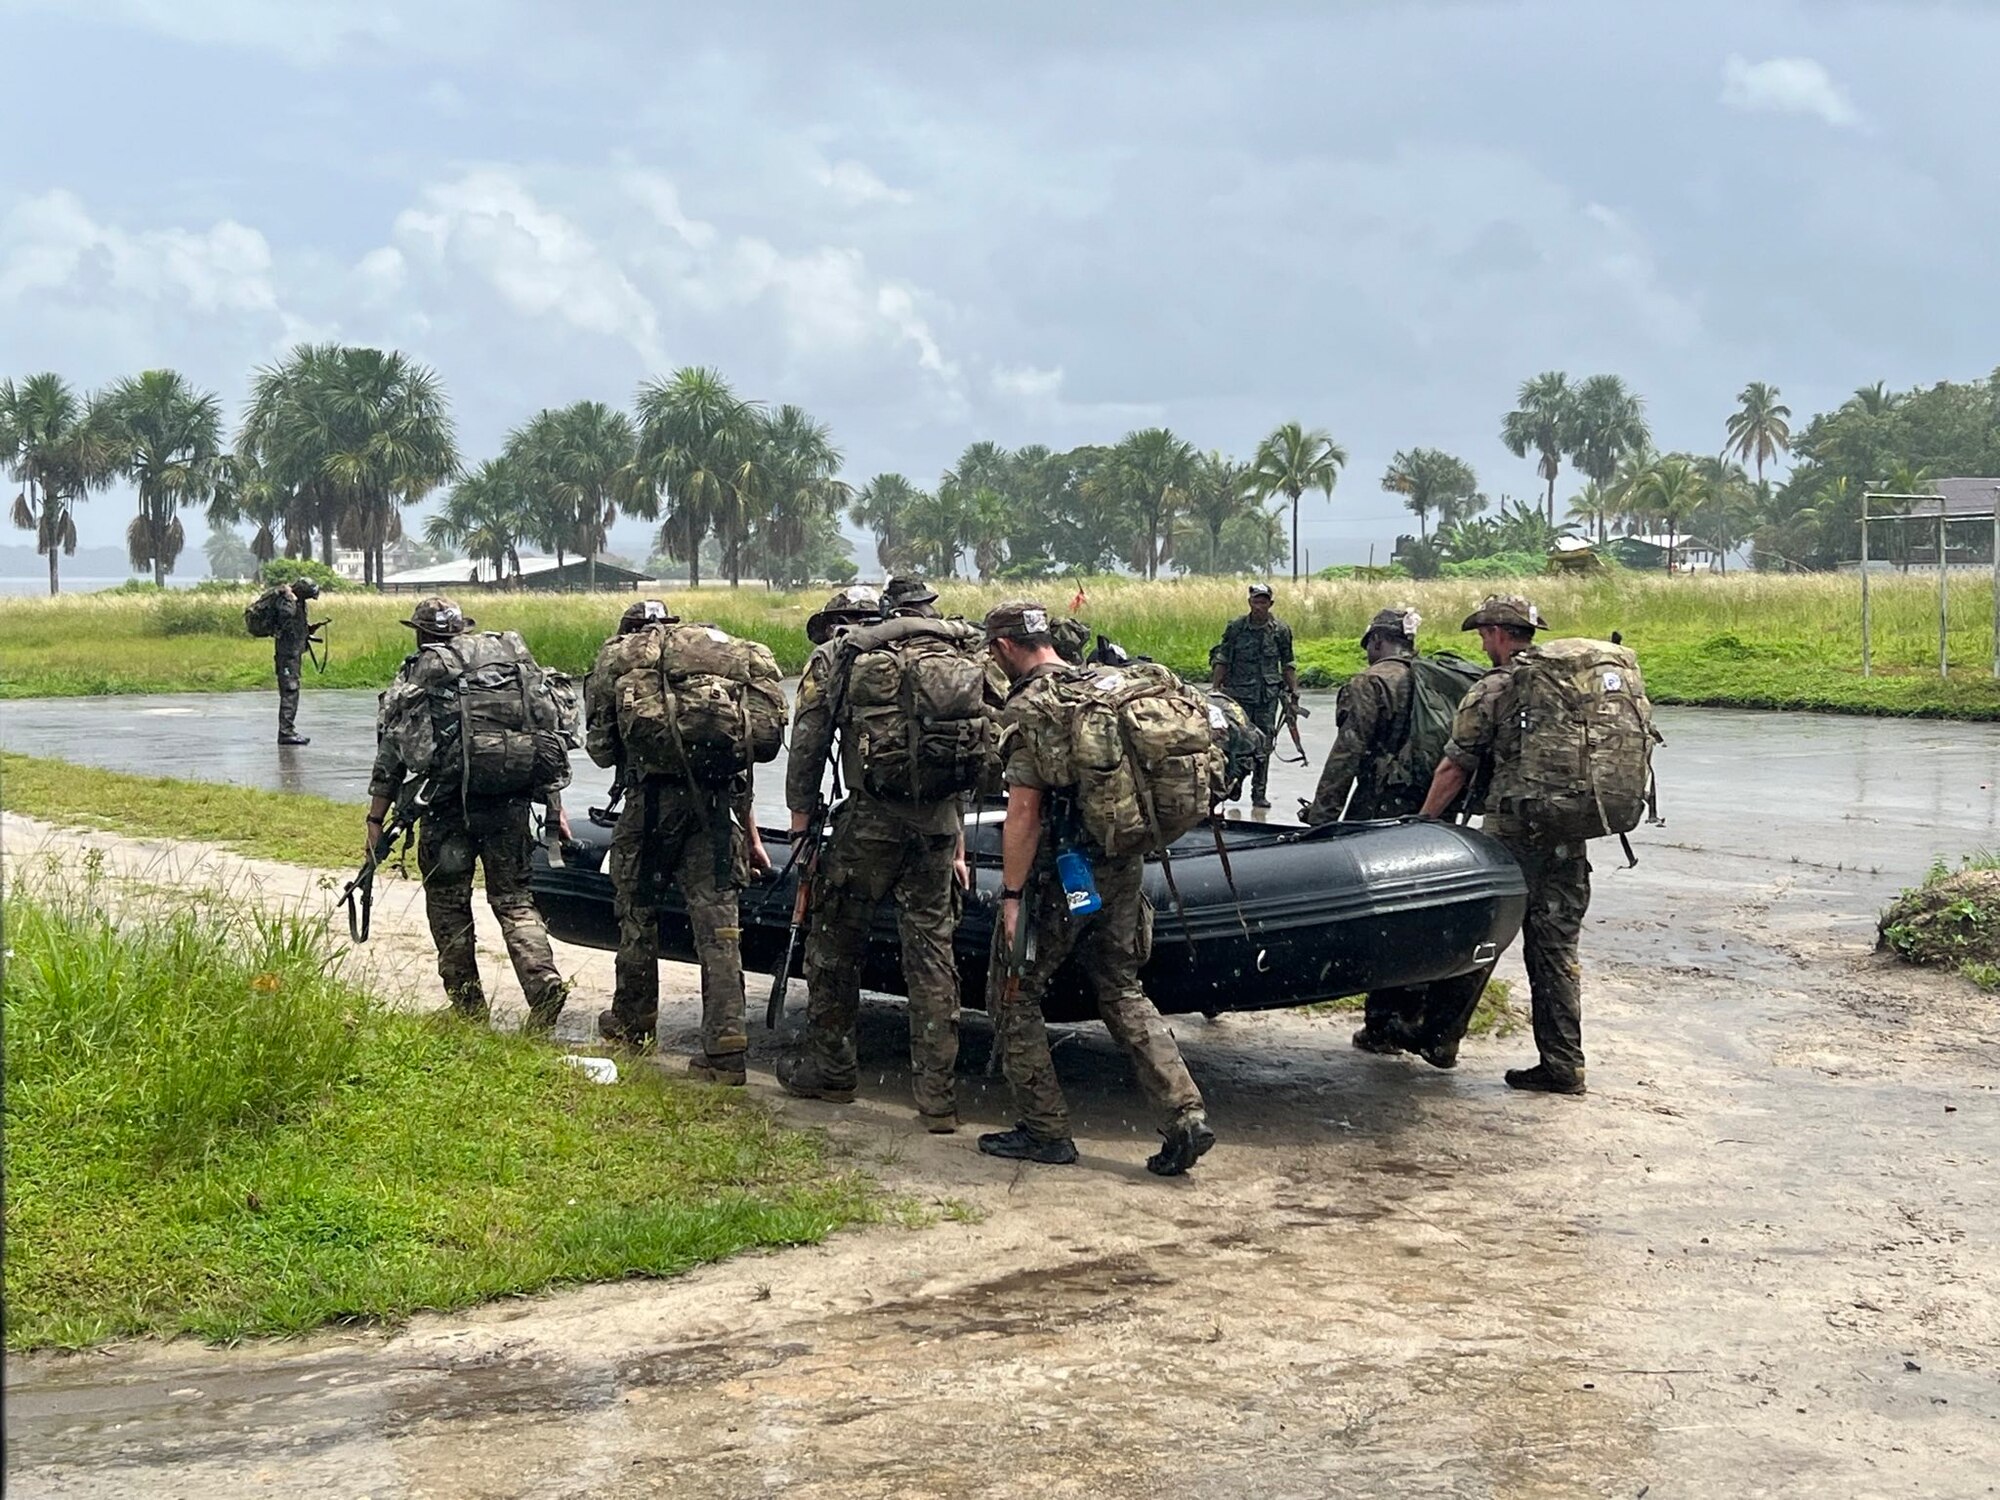 Multinational military partners from Guyana, Mexico, St. Lucia and the U.S. conduct a jungle master instructor course during TRADEWINDS23 Exercise at the Guyana Defense Force Jungle Amphibious Training School, Guyana, July 16, 2023.